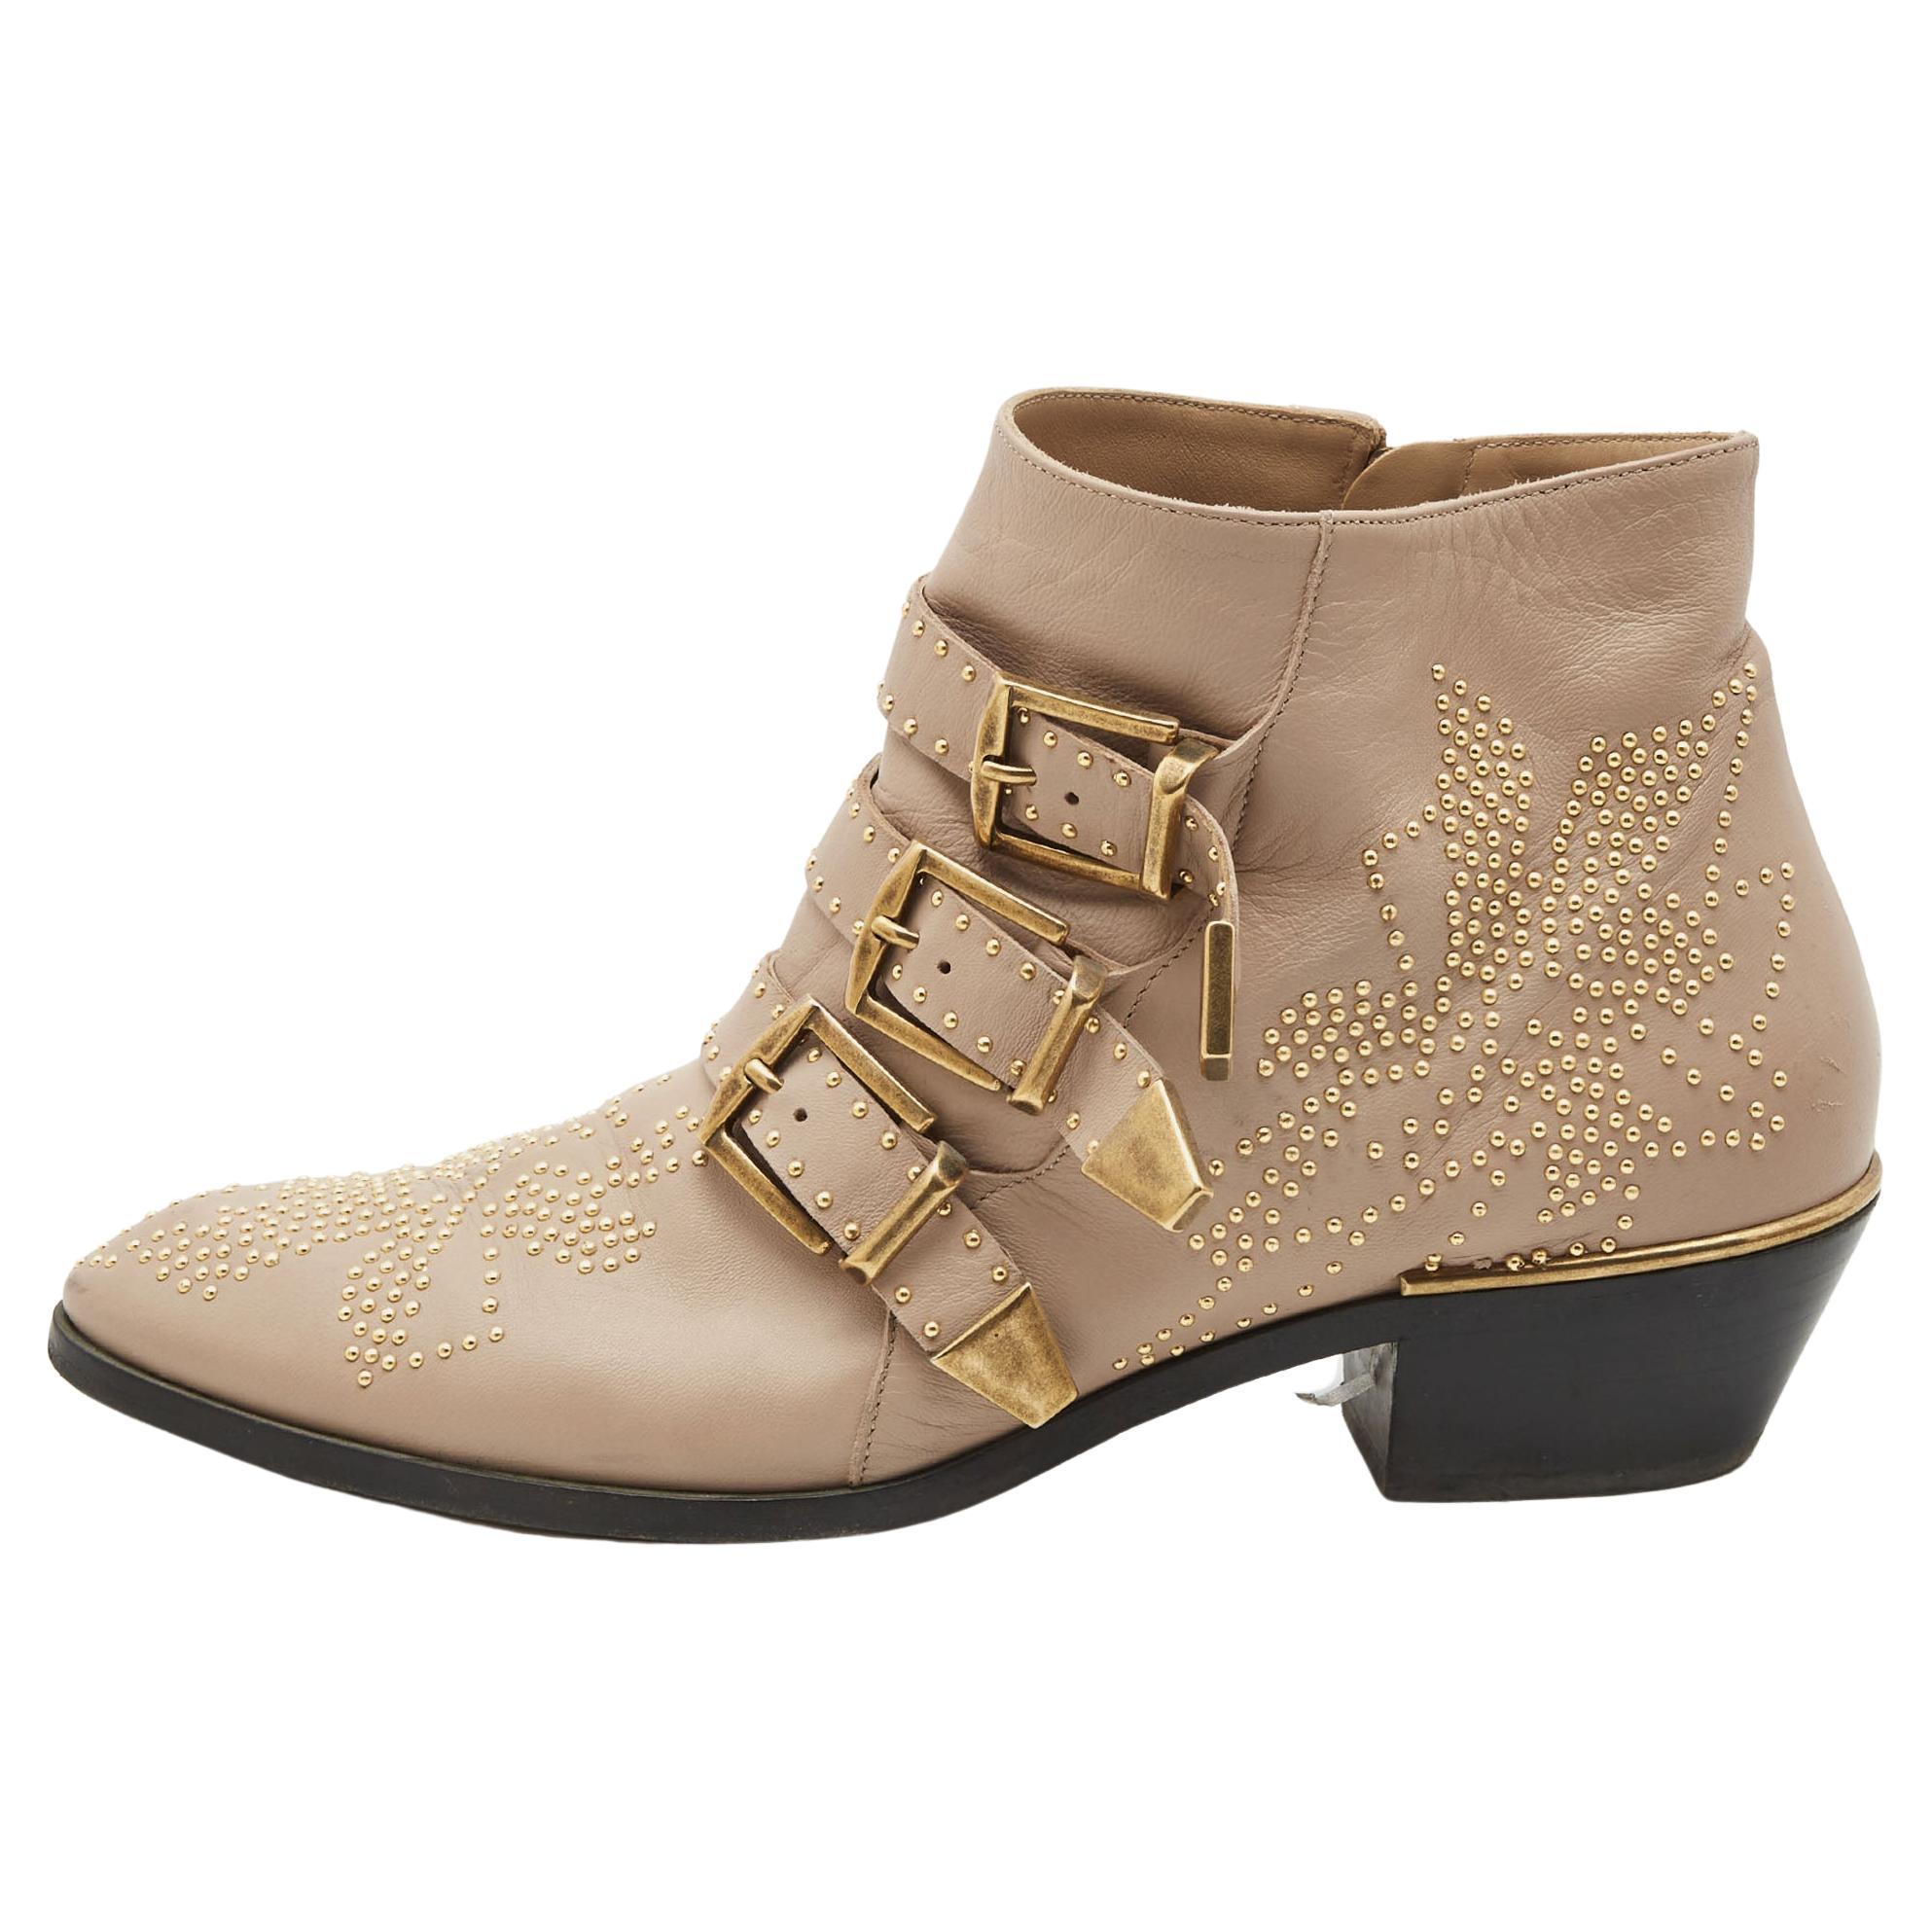 Chloe Beige Leather Studded Susanna Ankle Boots Size 39